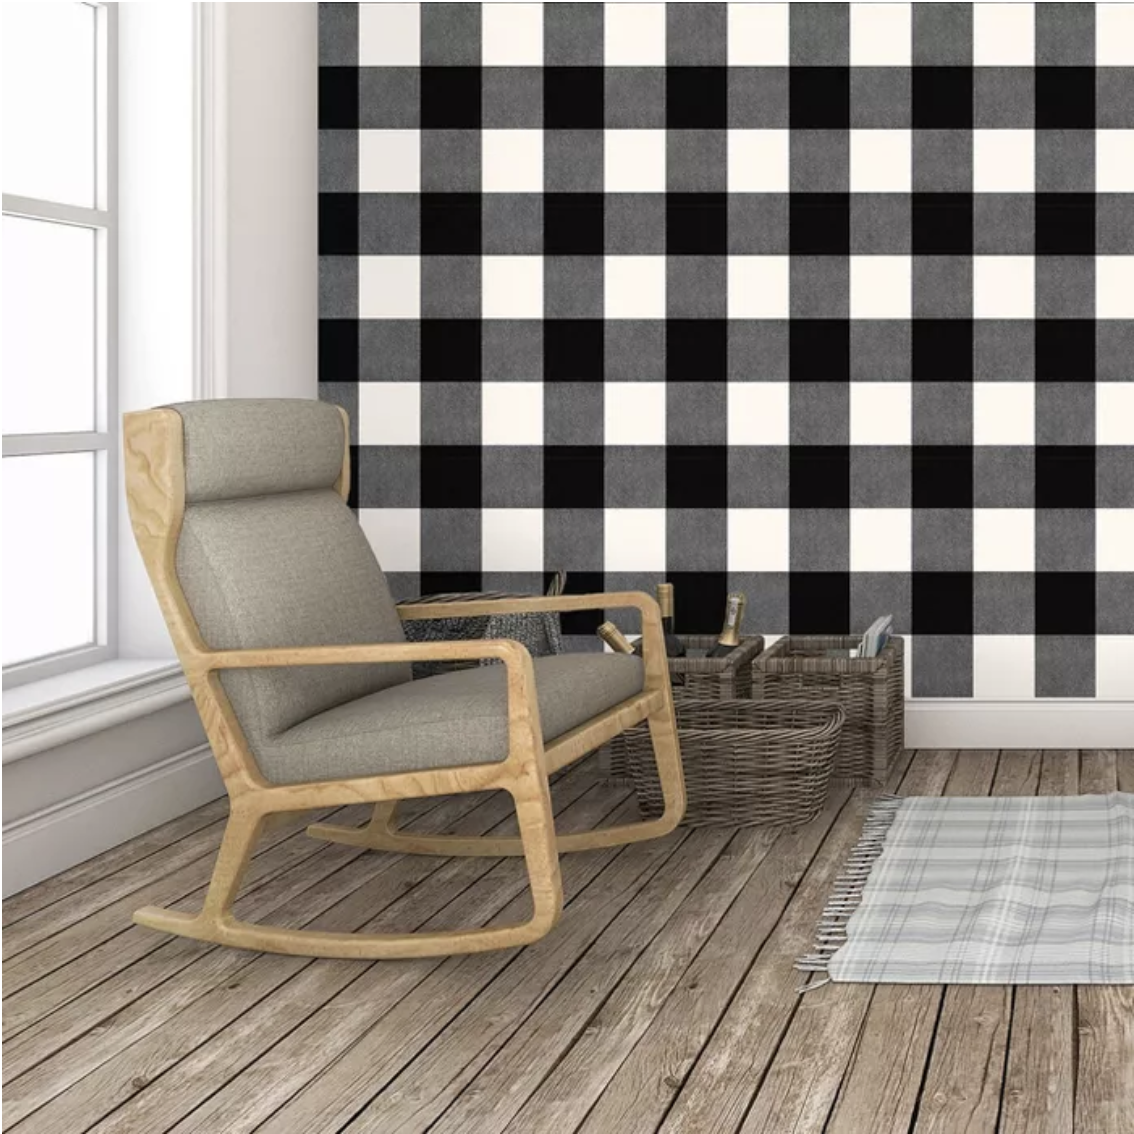 Rocking chair in front of black and white plaid wall